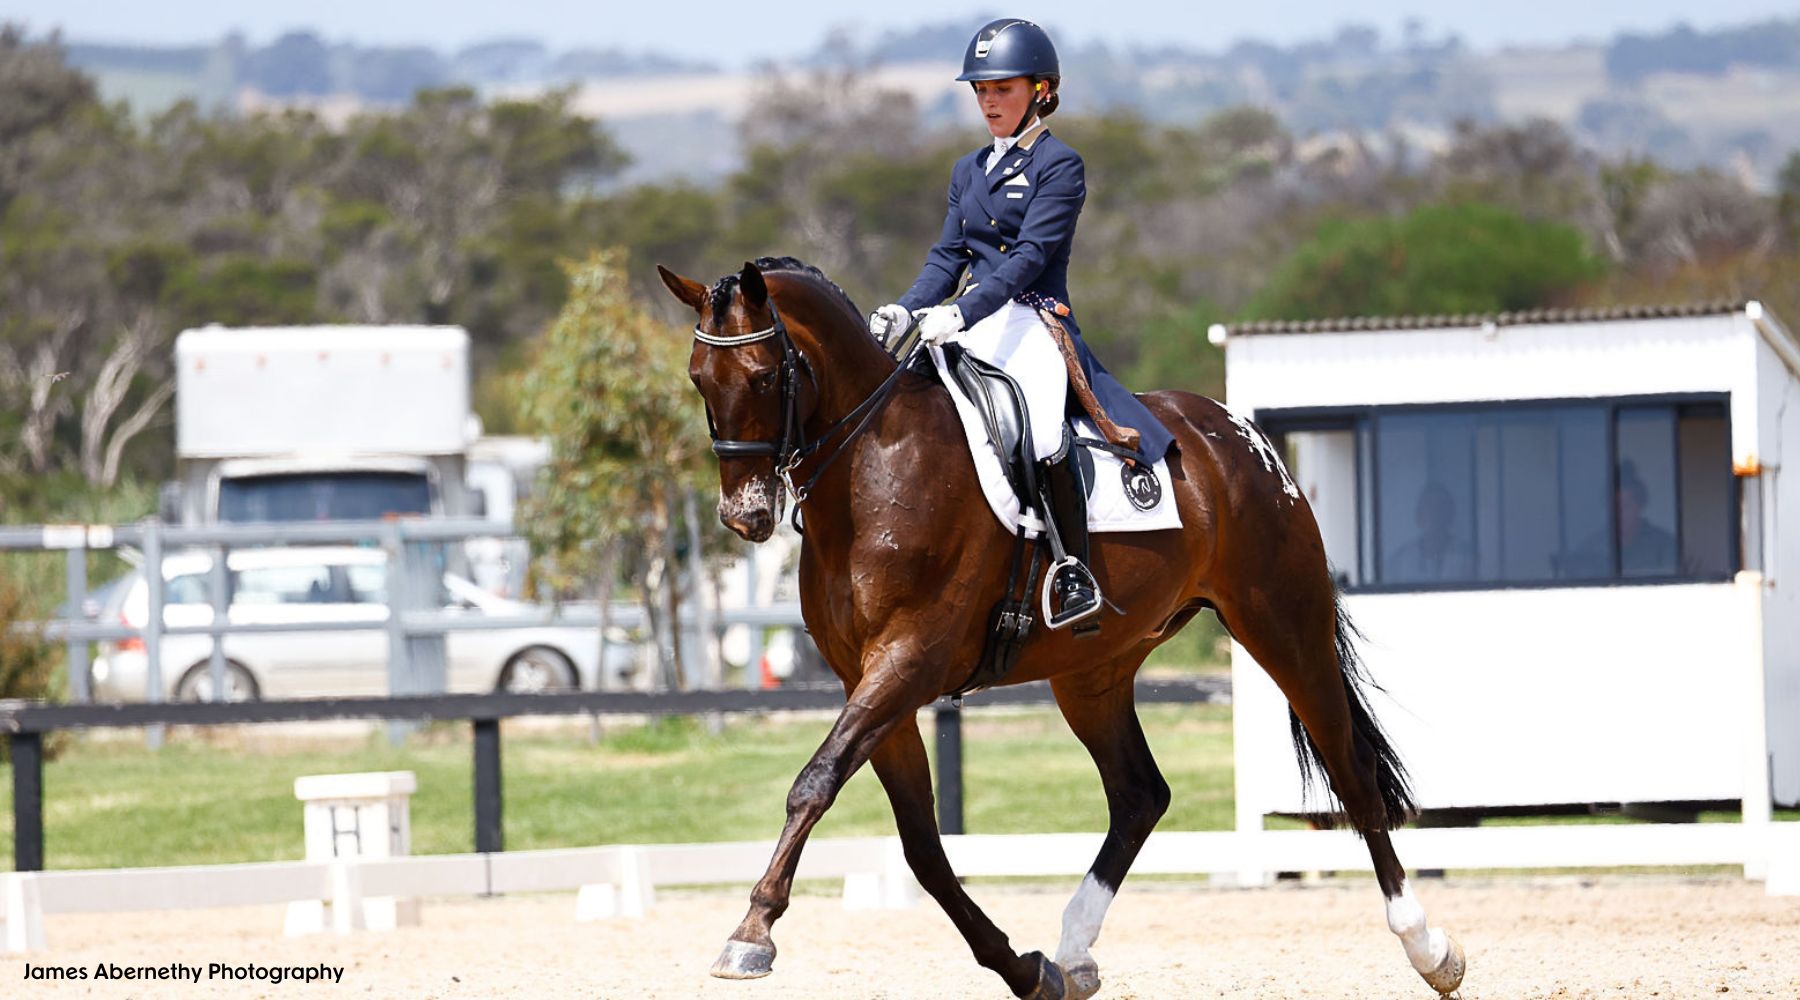 Lucy Cochrane – Head Competition Rider & Competing In Australia